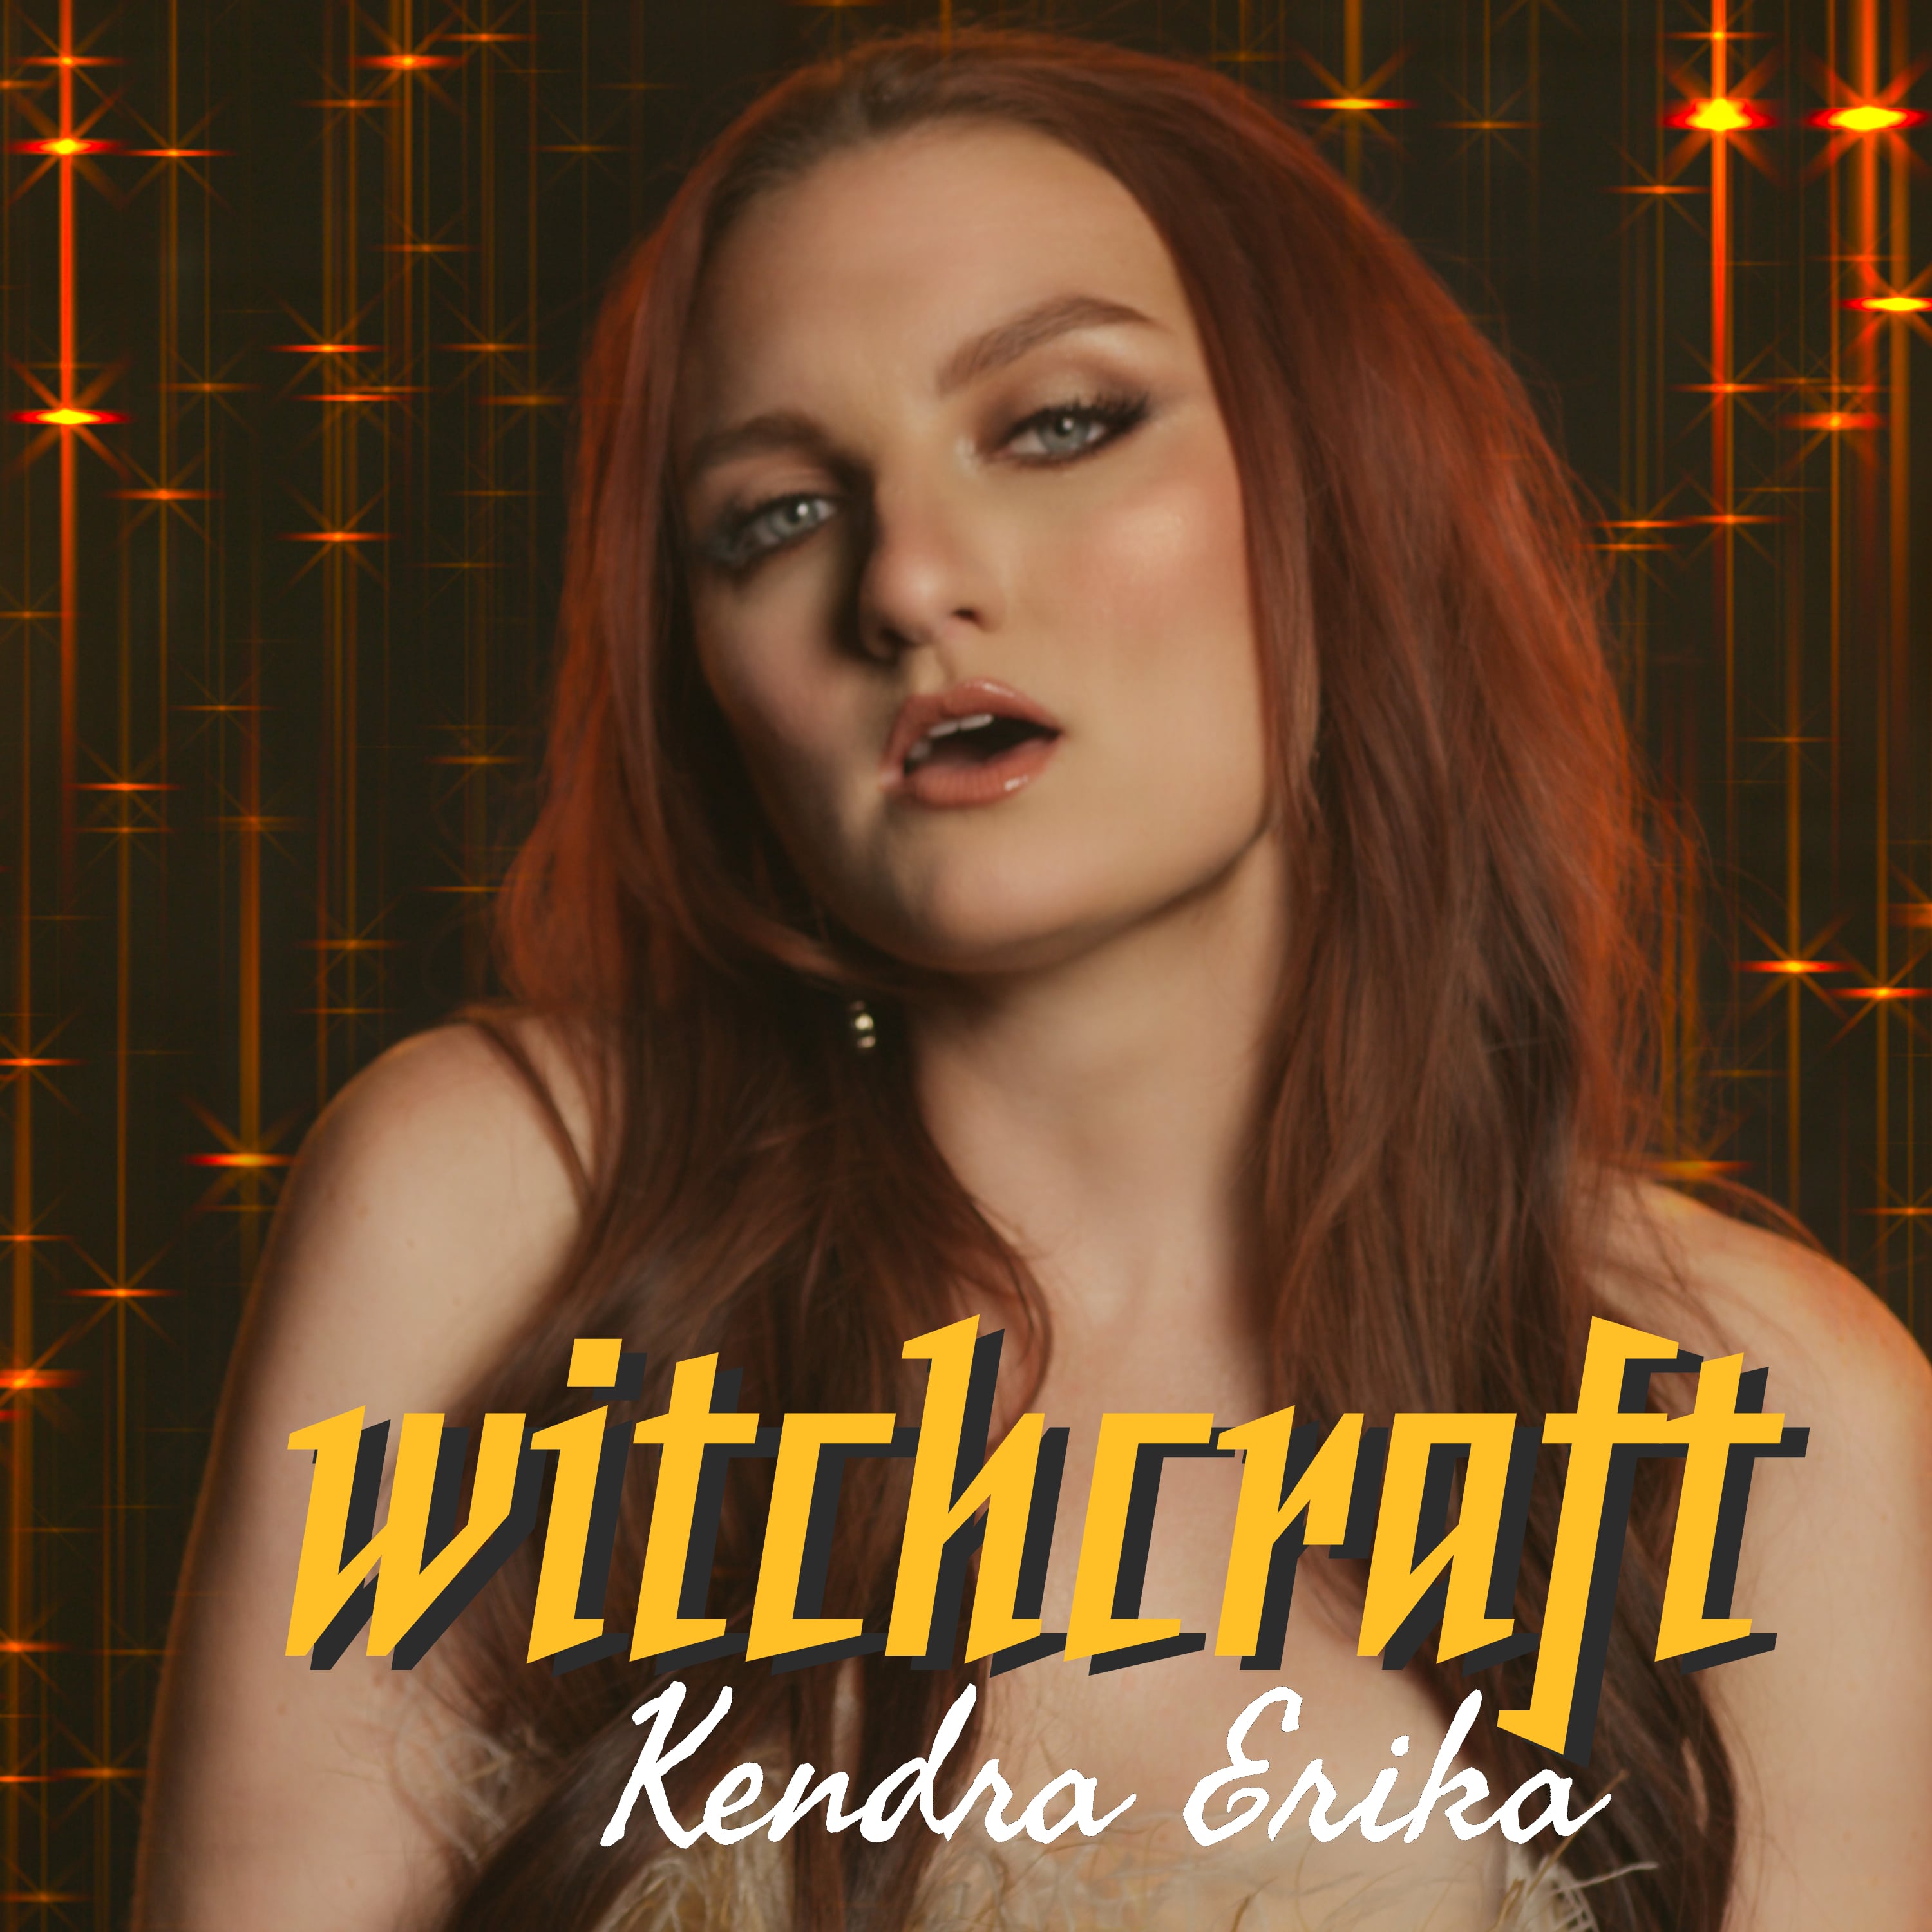 Art for Witchcraft by Kendra Erika